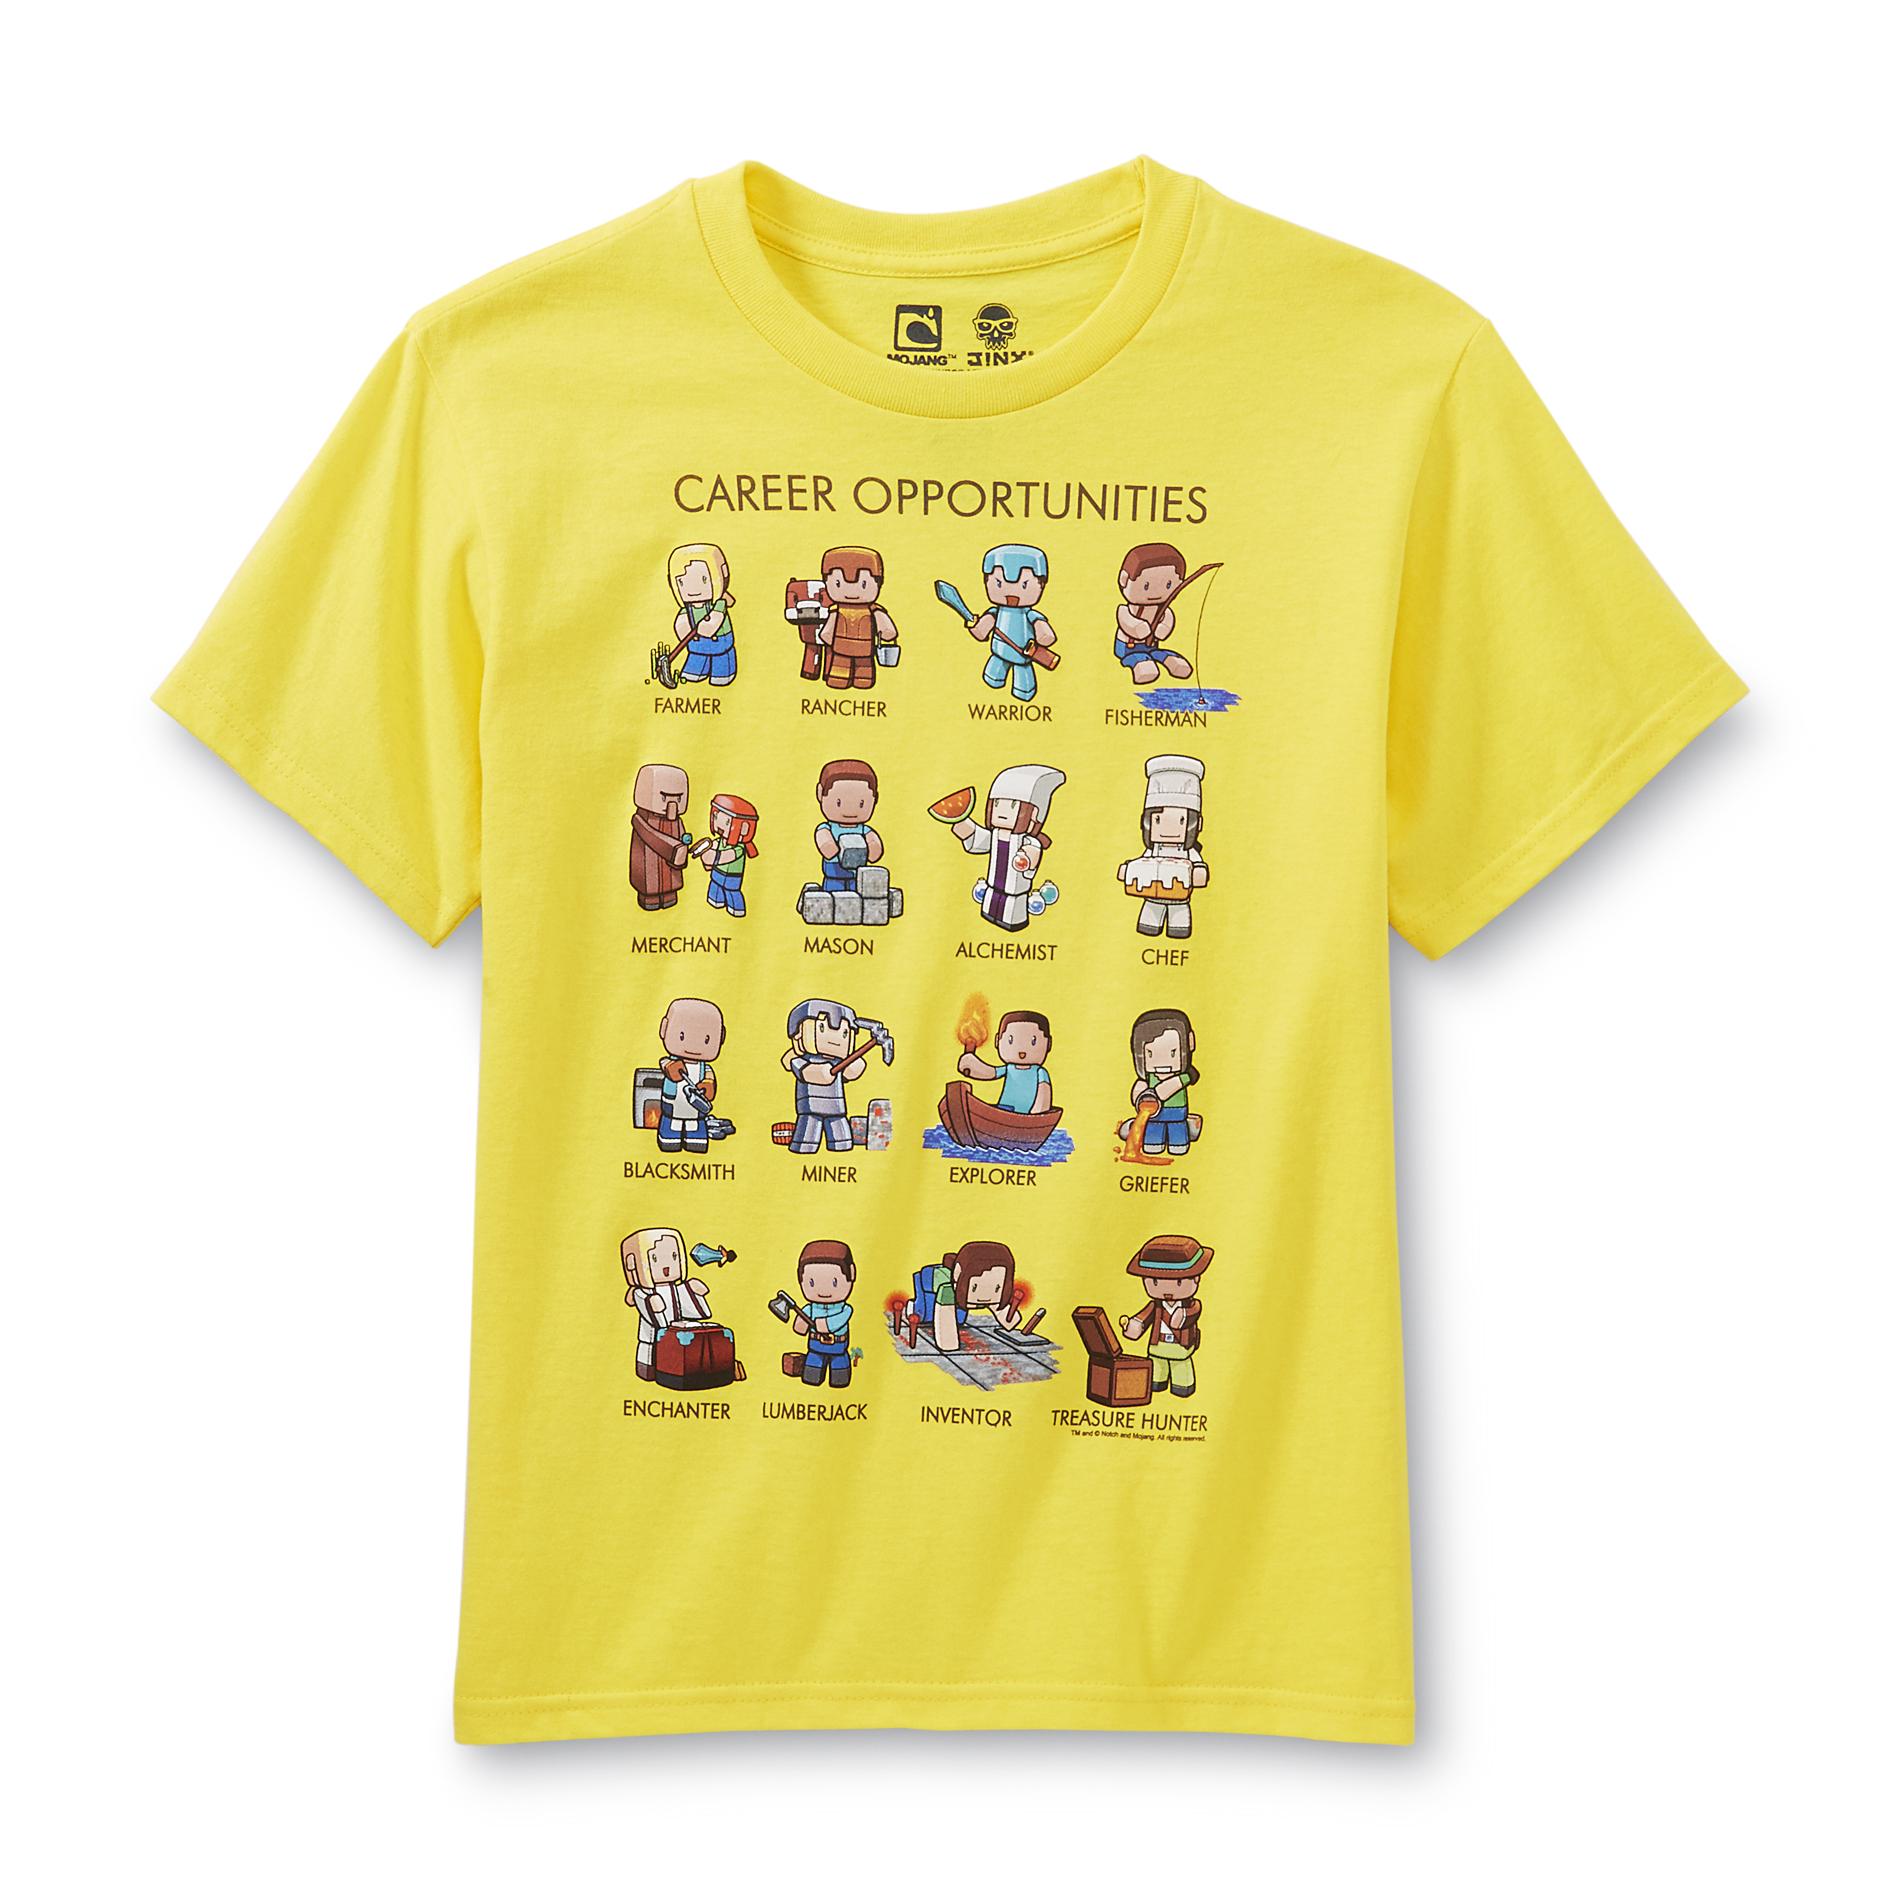 Minecraft Boy's Graphic T-Shirt - Career Opportunities